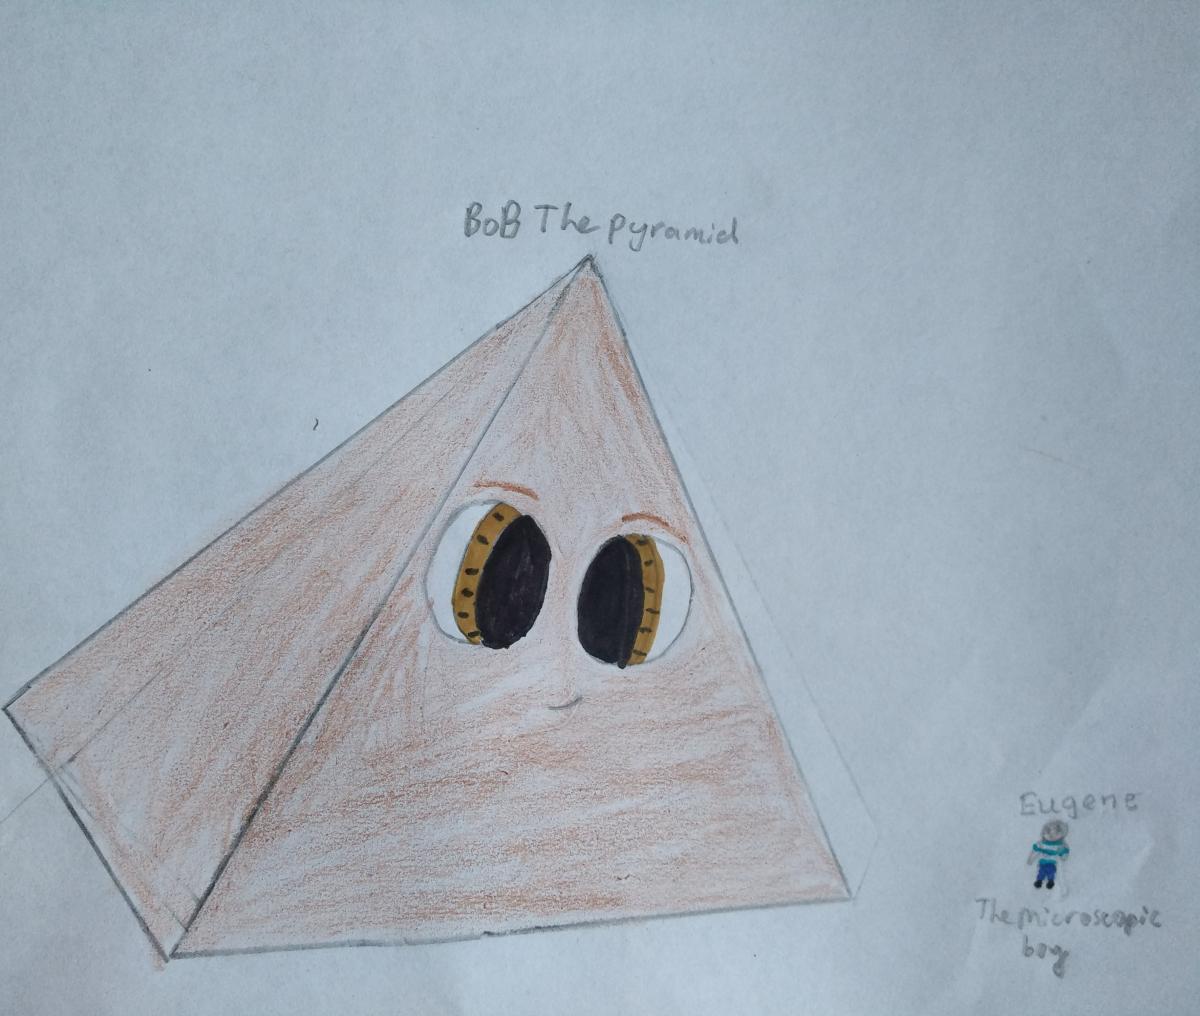 Bob the pyramid from the story, The Case of the Missing Scrolls